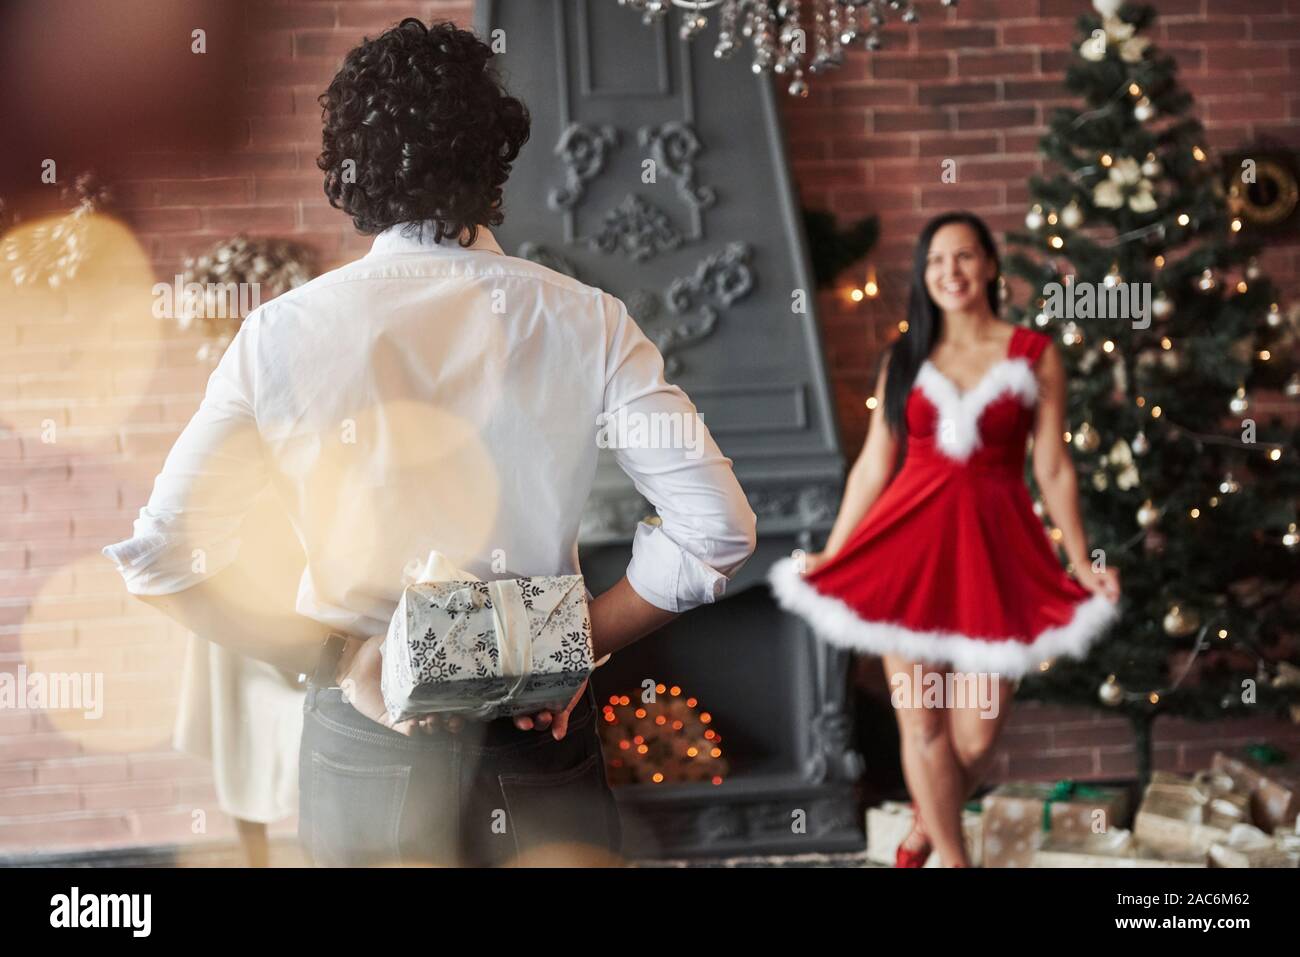 Time for sharing love and presents. Man stands and holds gift box behind. Woman in red dress will now receive Christmas gift from boyfriend Stock Photo